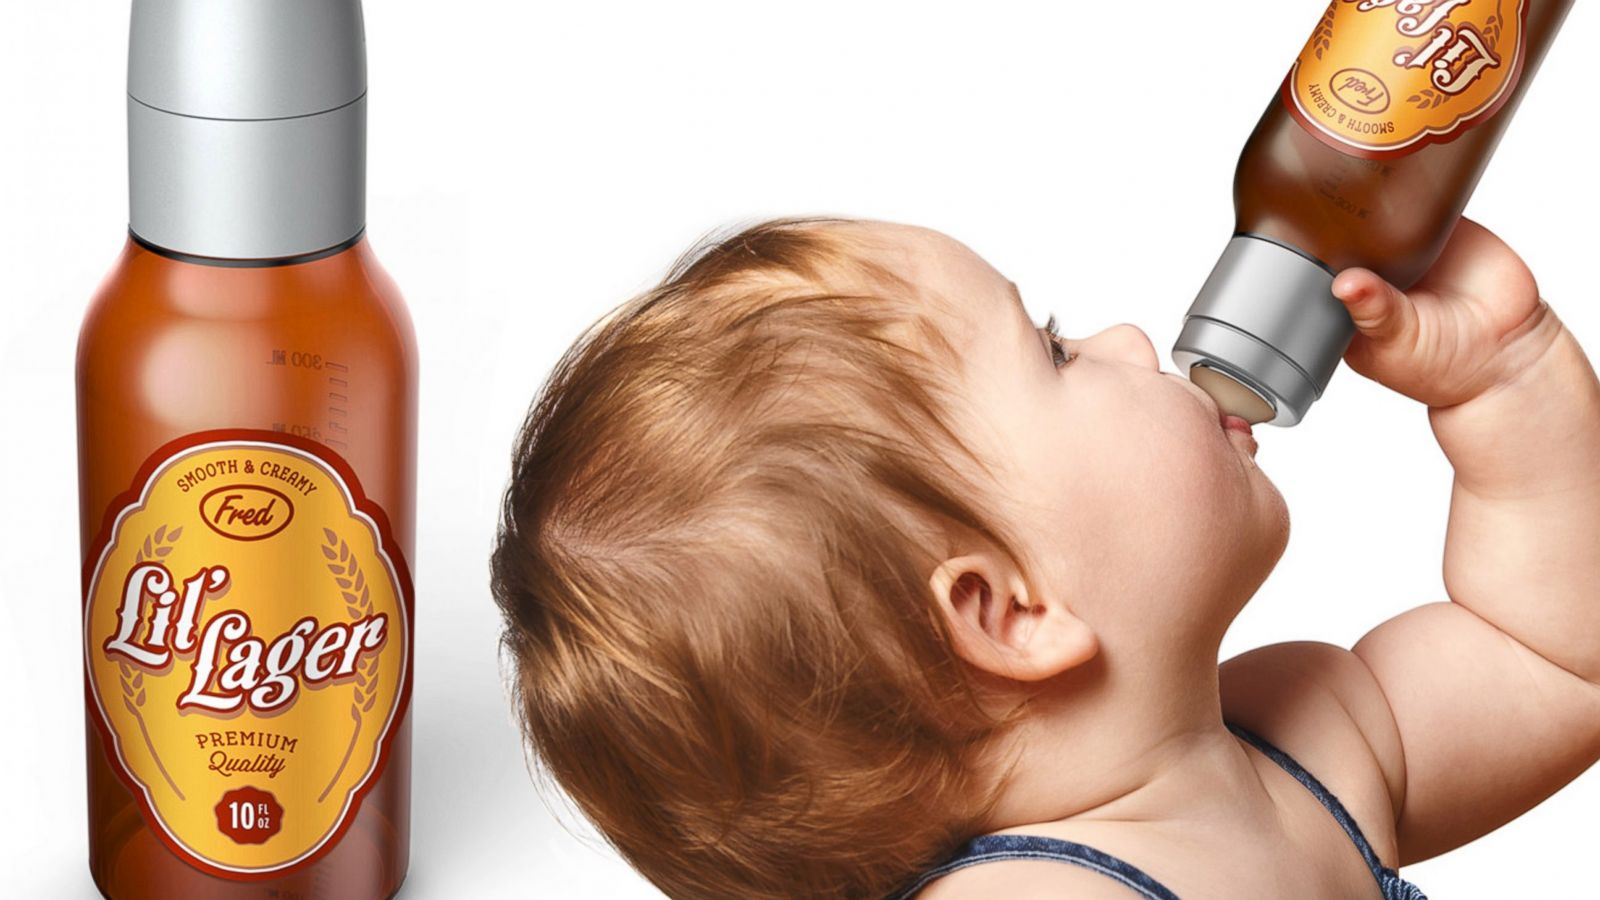 Baby Bottles and 4 More Questionable Children's Toys - News